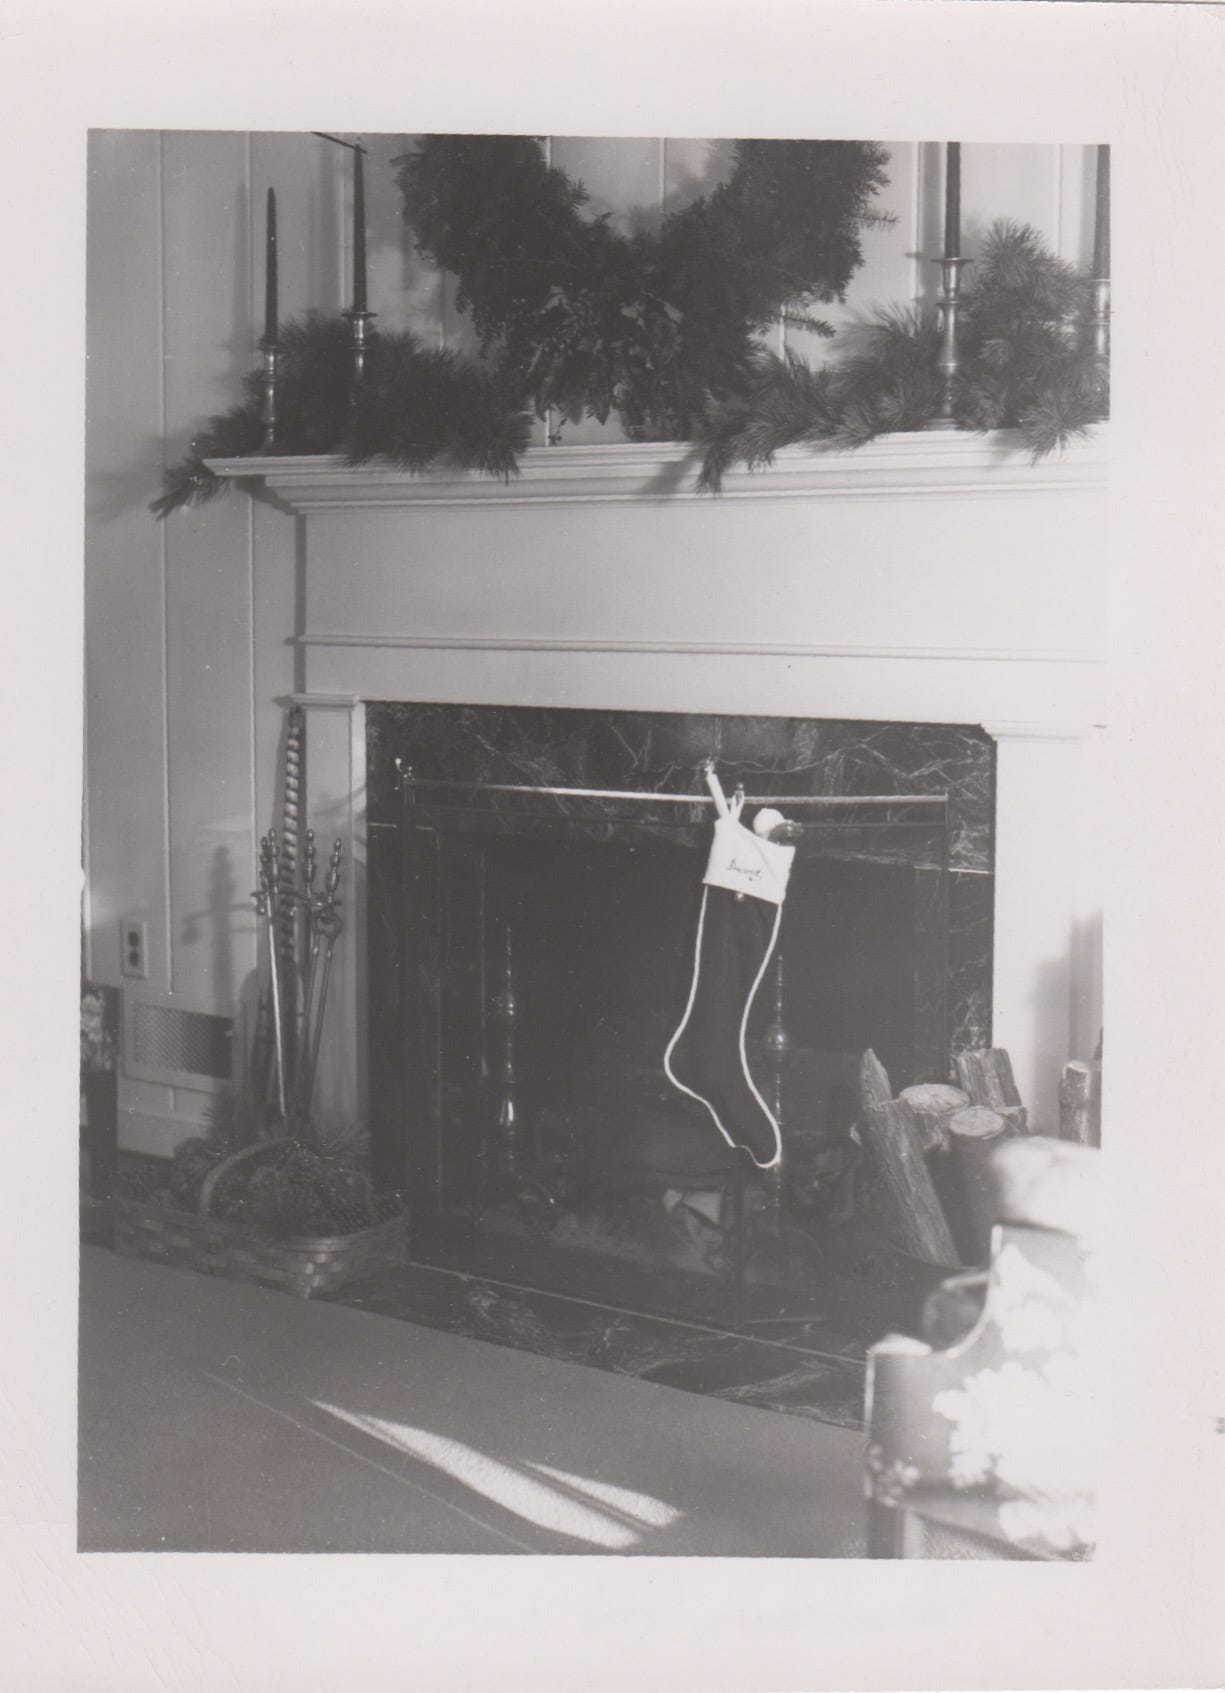 Photo of hearth decorated for Christmastime, with a large evergreen wreath above the mantle and fluffy evergreen branches on the mantle.